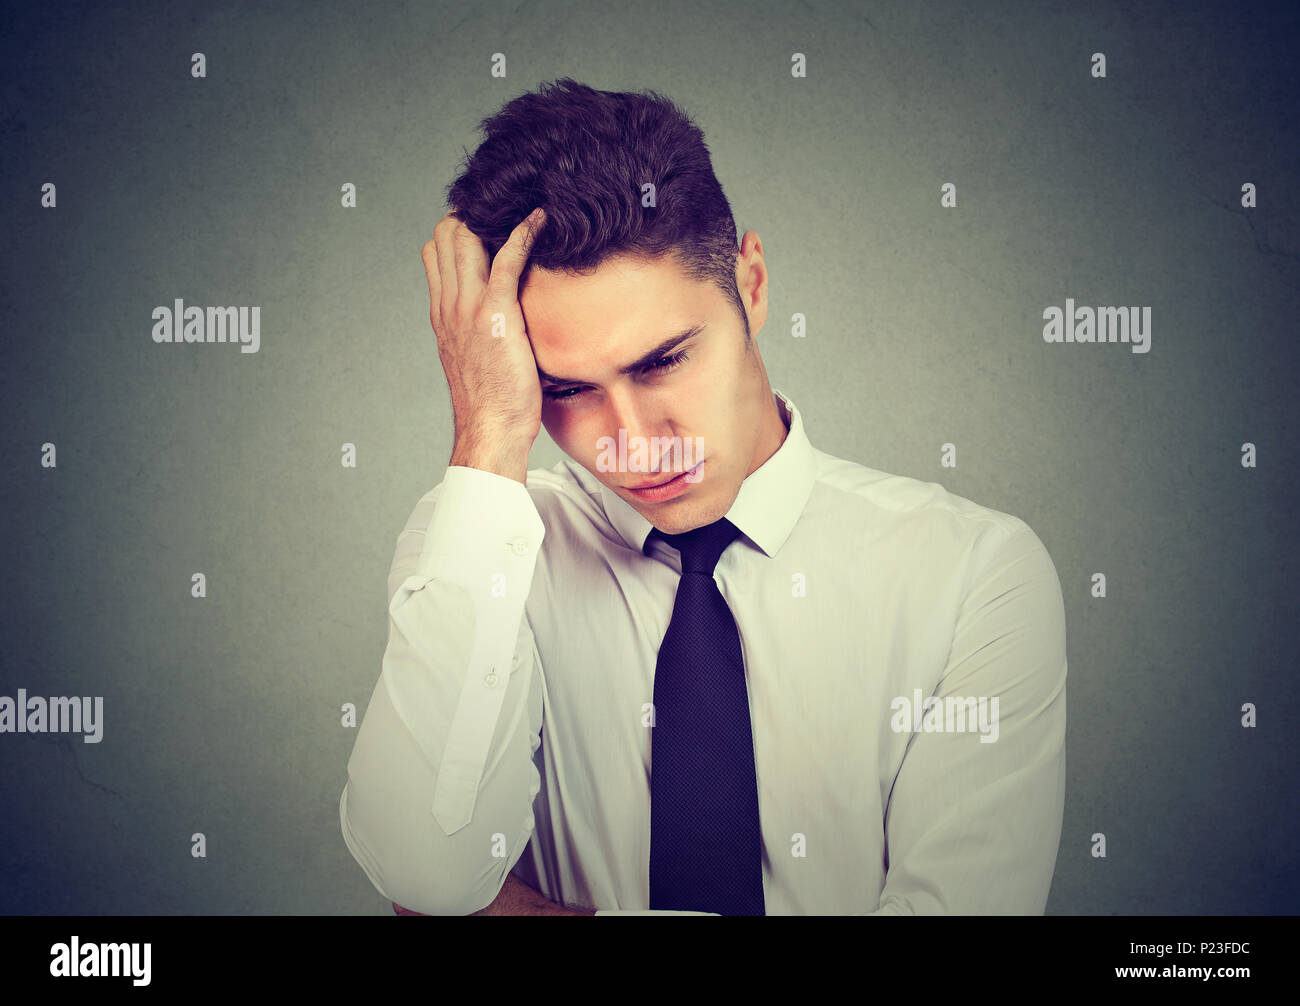 Portrait of a depressed business man. Stock Photo